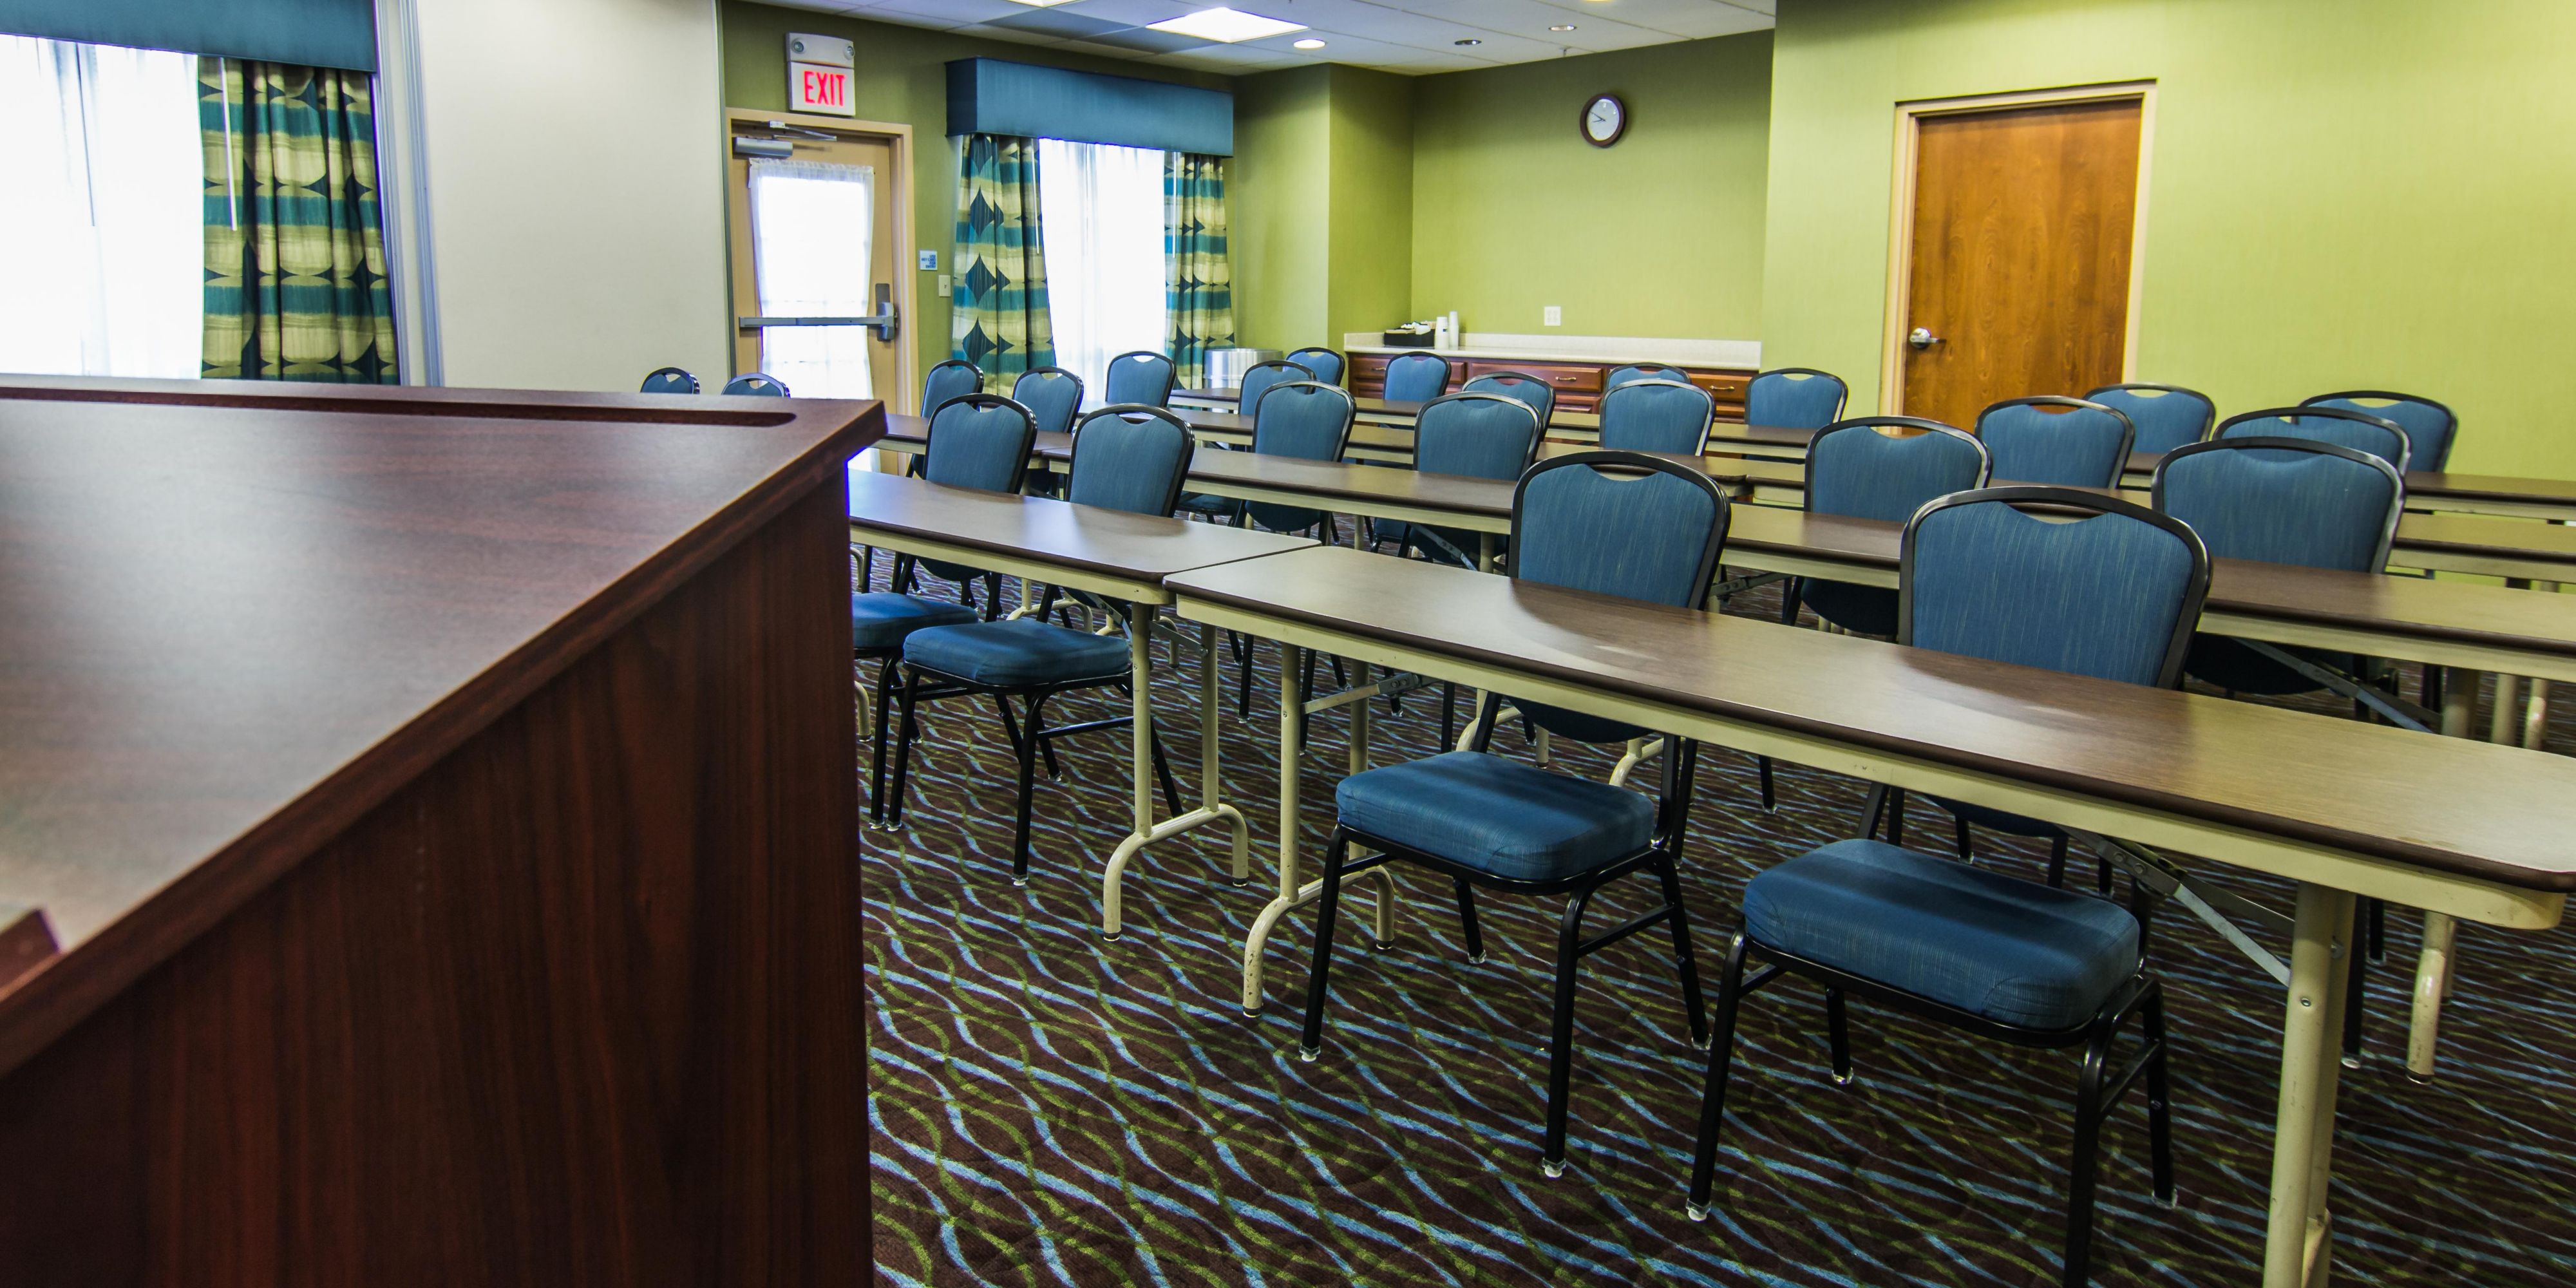 Let the Holiday Inn Express Winchester VA host your next meeting offering 634 square feet of meeting space with 10-foot ceilings. Our Dogwood Room is equipped with pull down screen, white board, televisions, and DVD player, that can accommodate up to 35 people. Laptop projector available for a daily fee. Complimentary coffee, ice water and Wi-Fi.